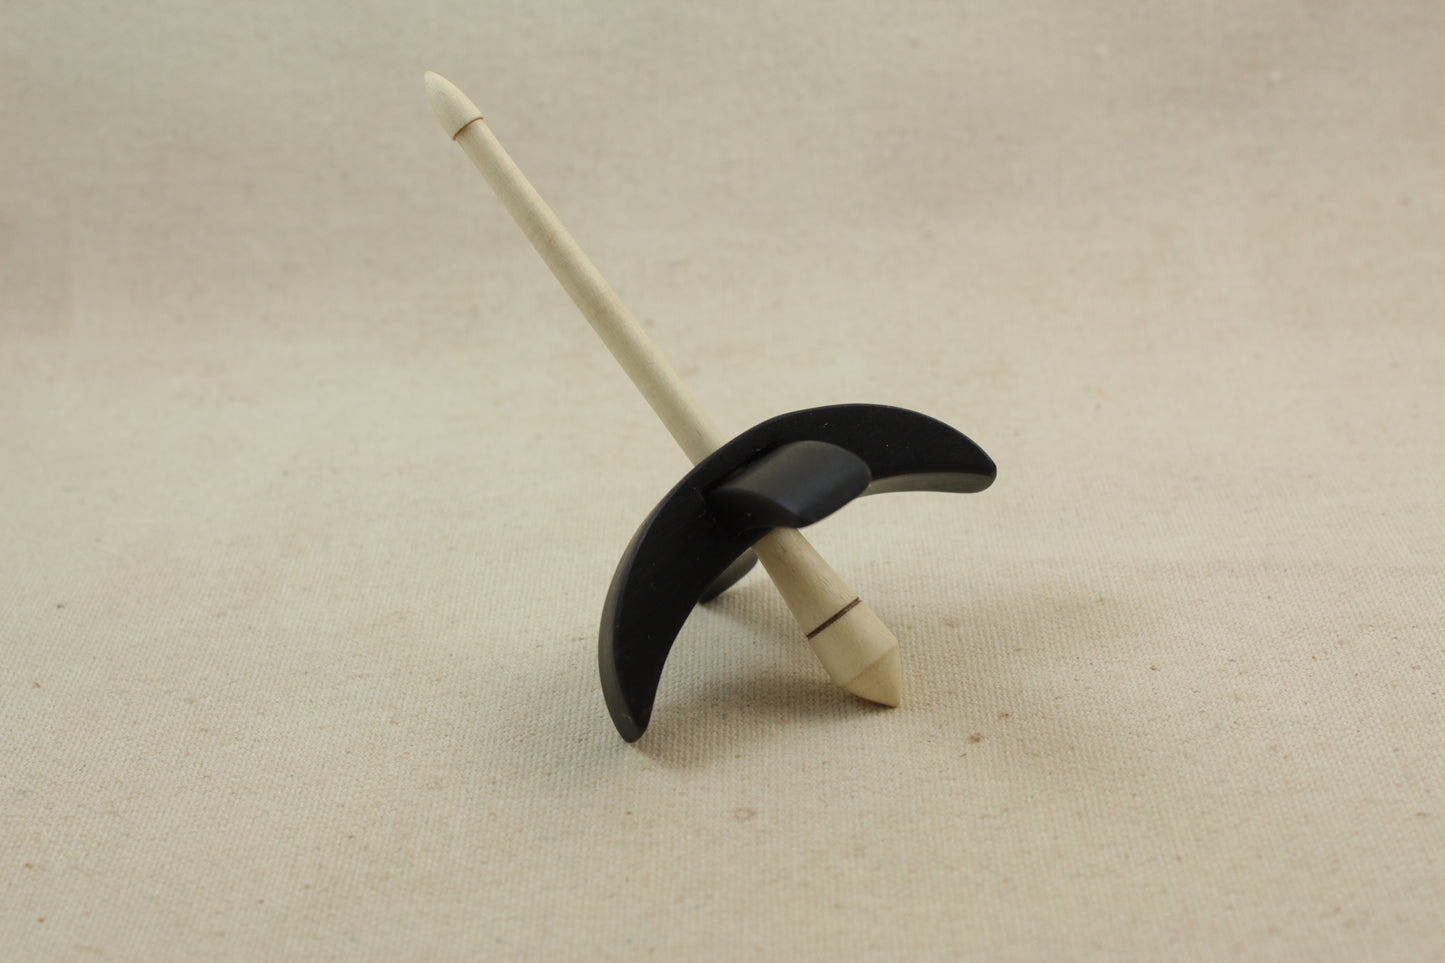 Ebony/Holly Mini Turkish Drop Spindle 2.5 inch arms 4.25 tall